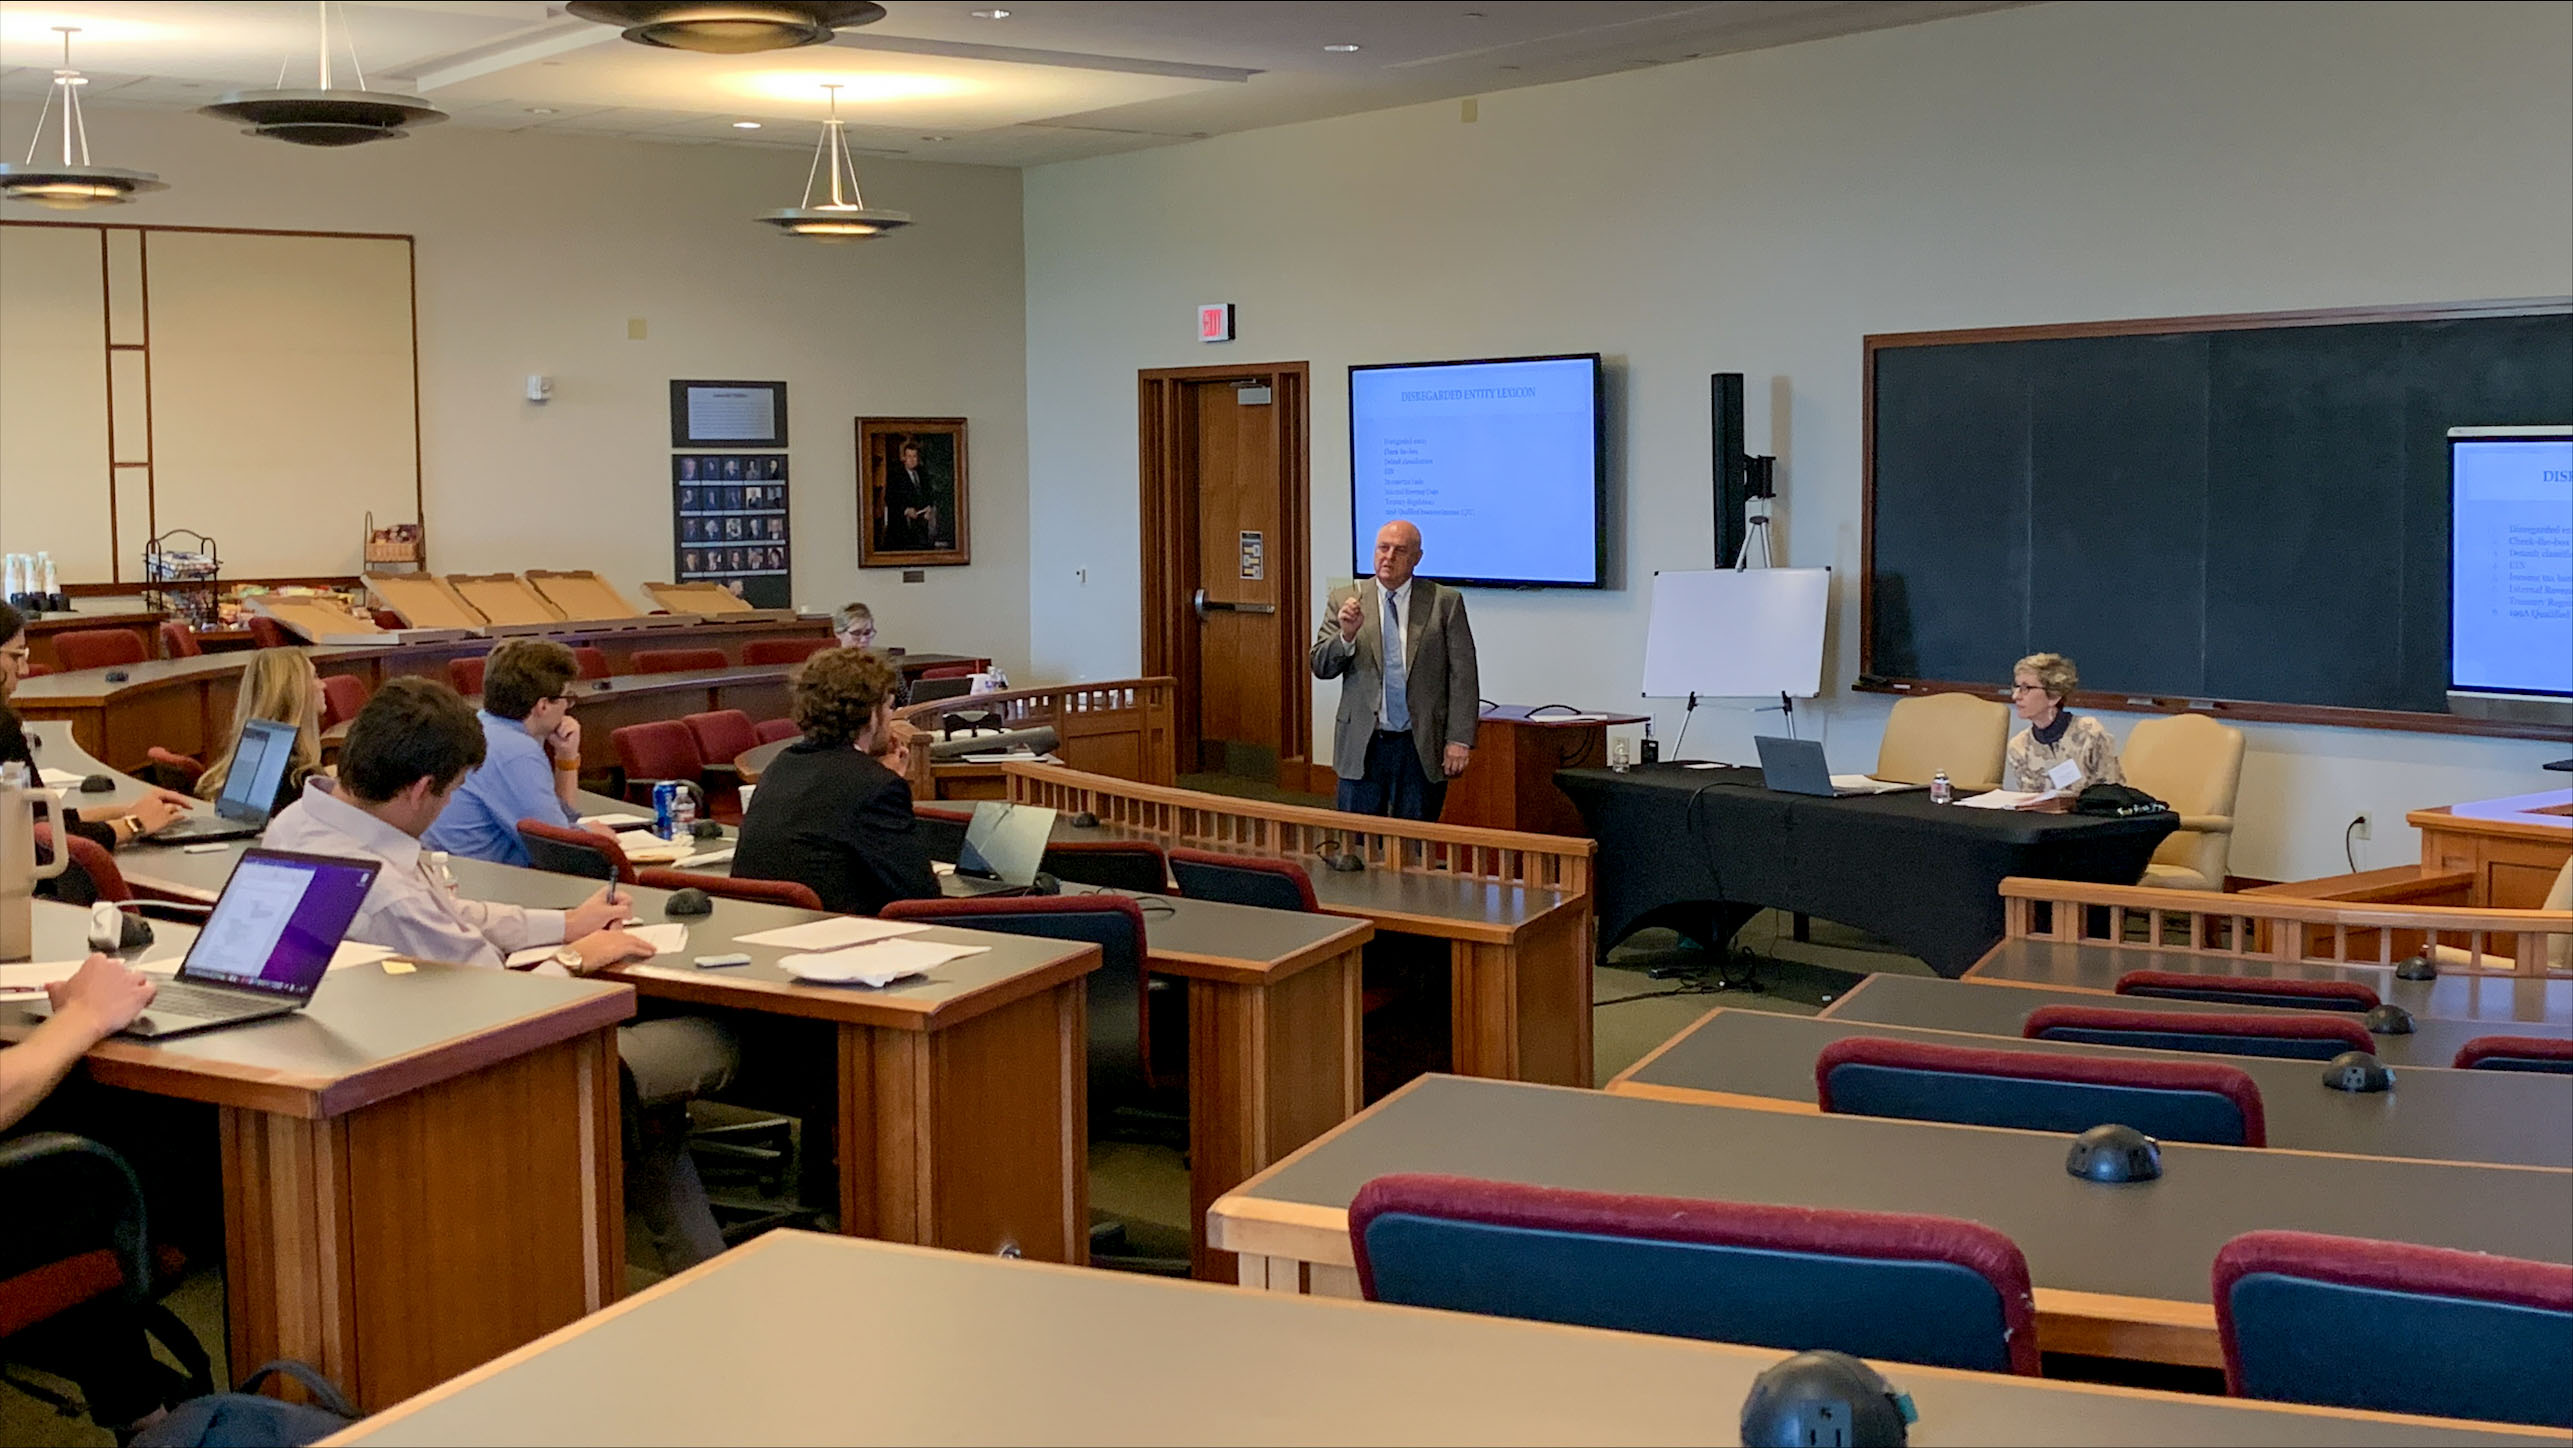 Dan Baucum, standing, and Professor Miller, seated, teach in front of classroom full of students.